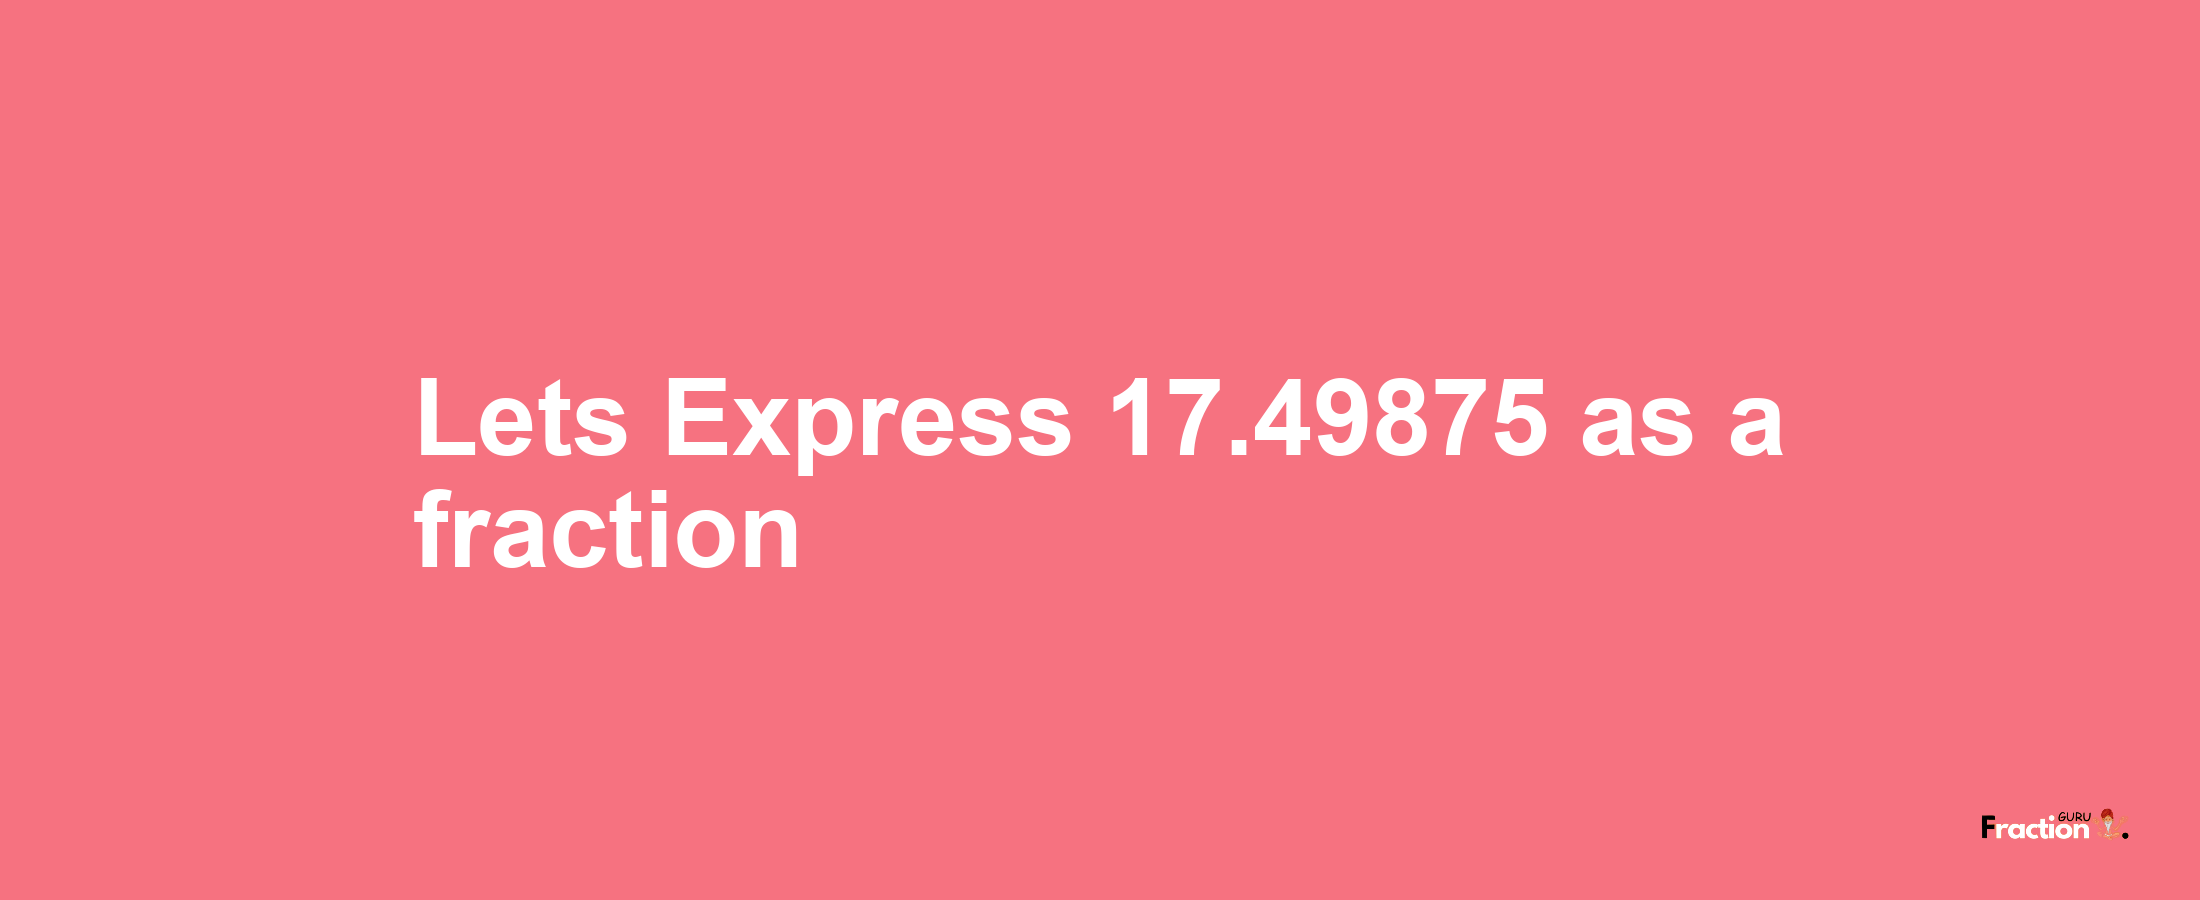 Lets Express 17.49875 as afraction